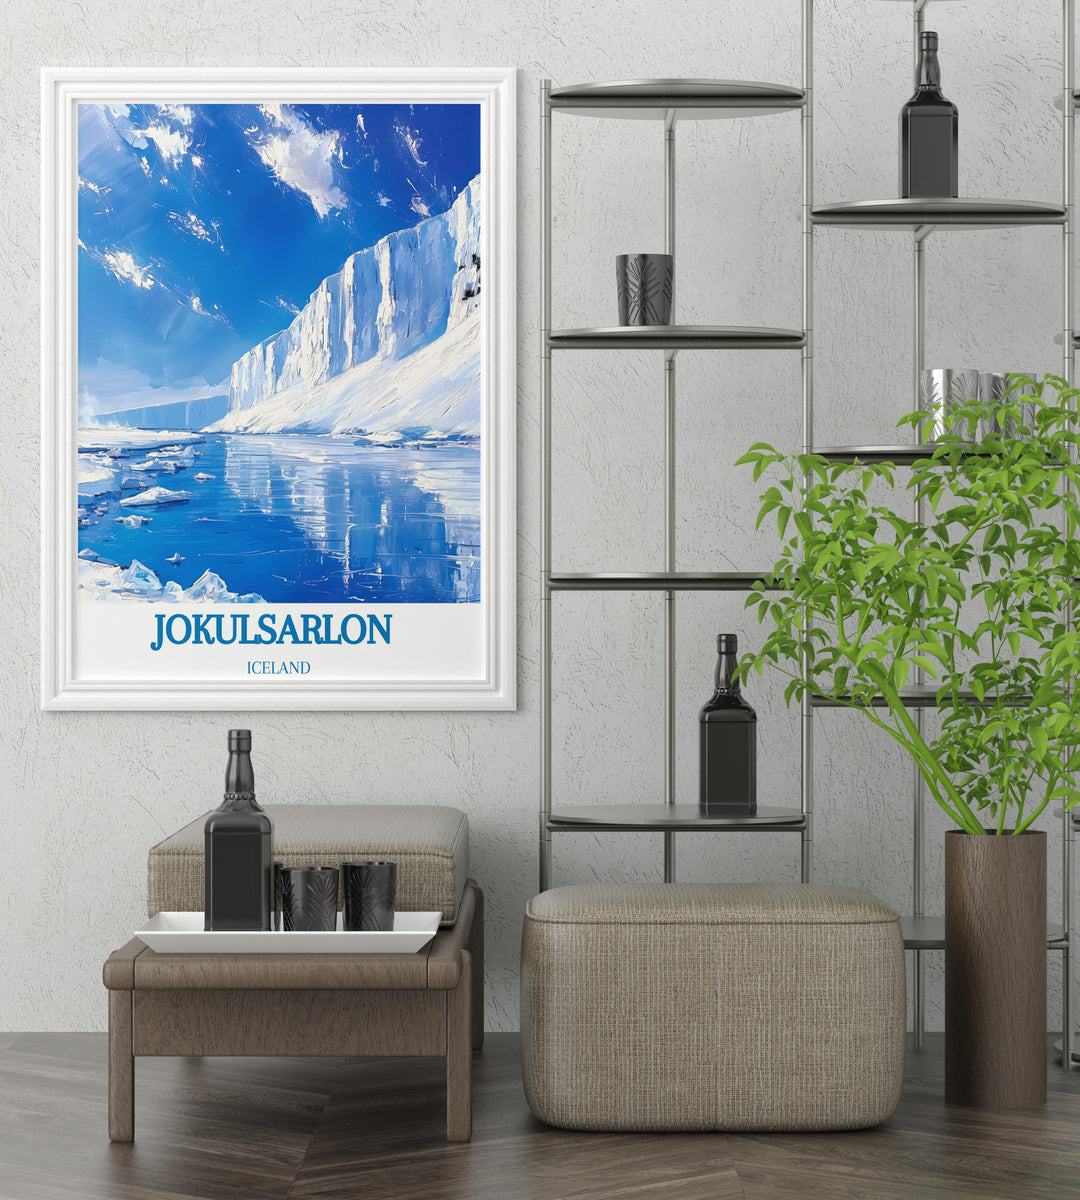 Iceland travel poster focusing on the rugged landscapes and ice formations of Iceberg Lagoon suitable for adventure enthusiasts